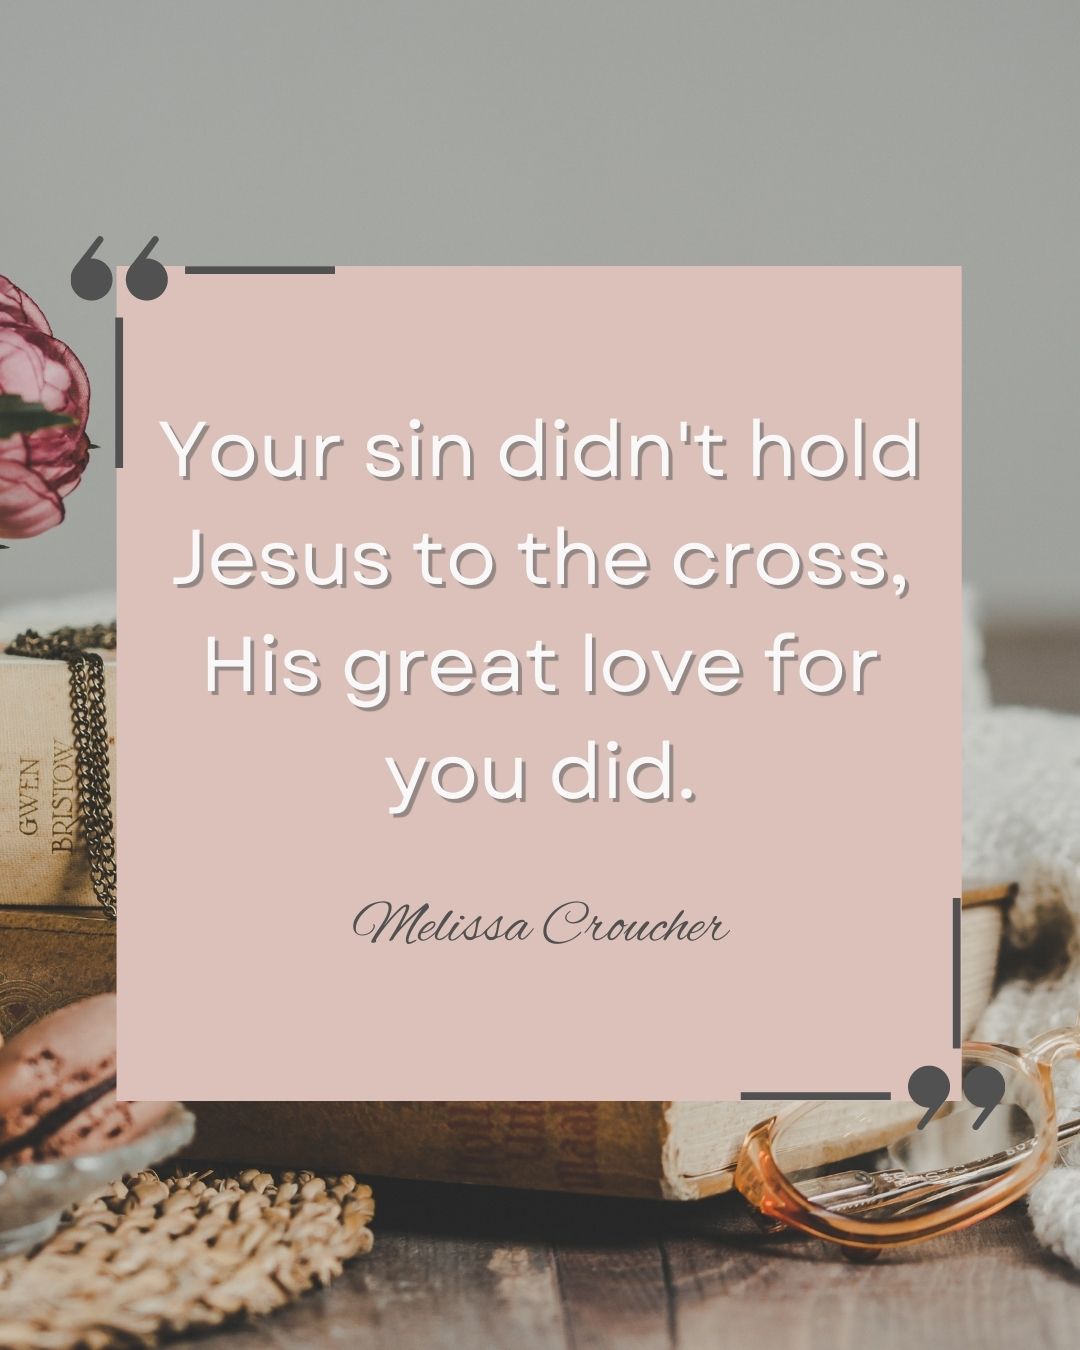 Your sin didn't hold Jesus to the corss, His great love for you did. Melissa Croucher